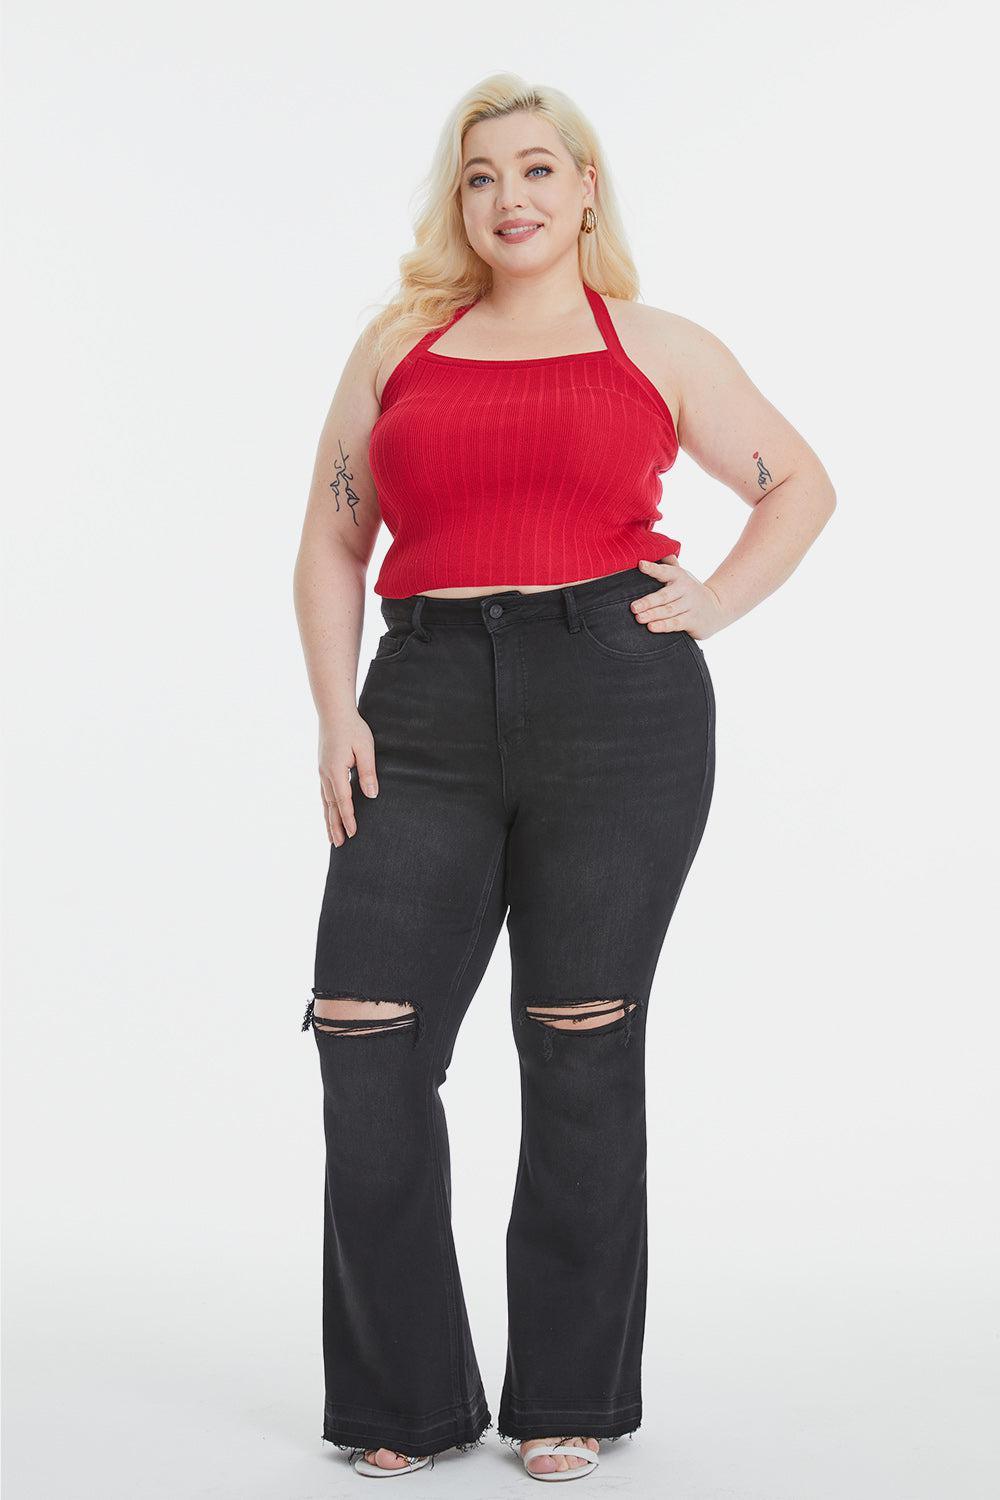 a woman in a red top and black jeans